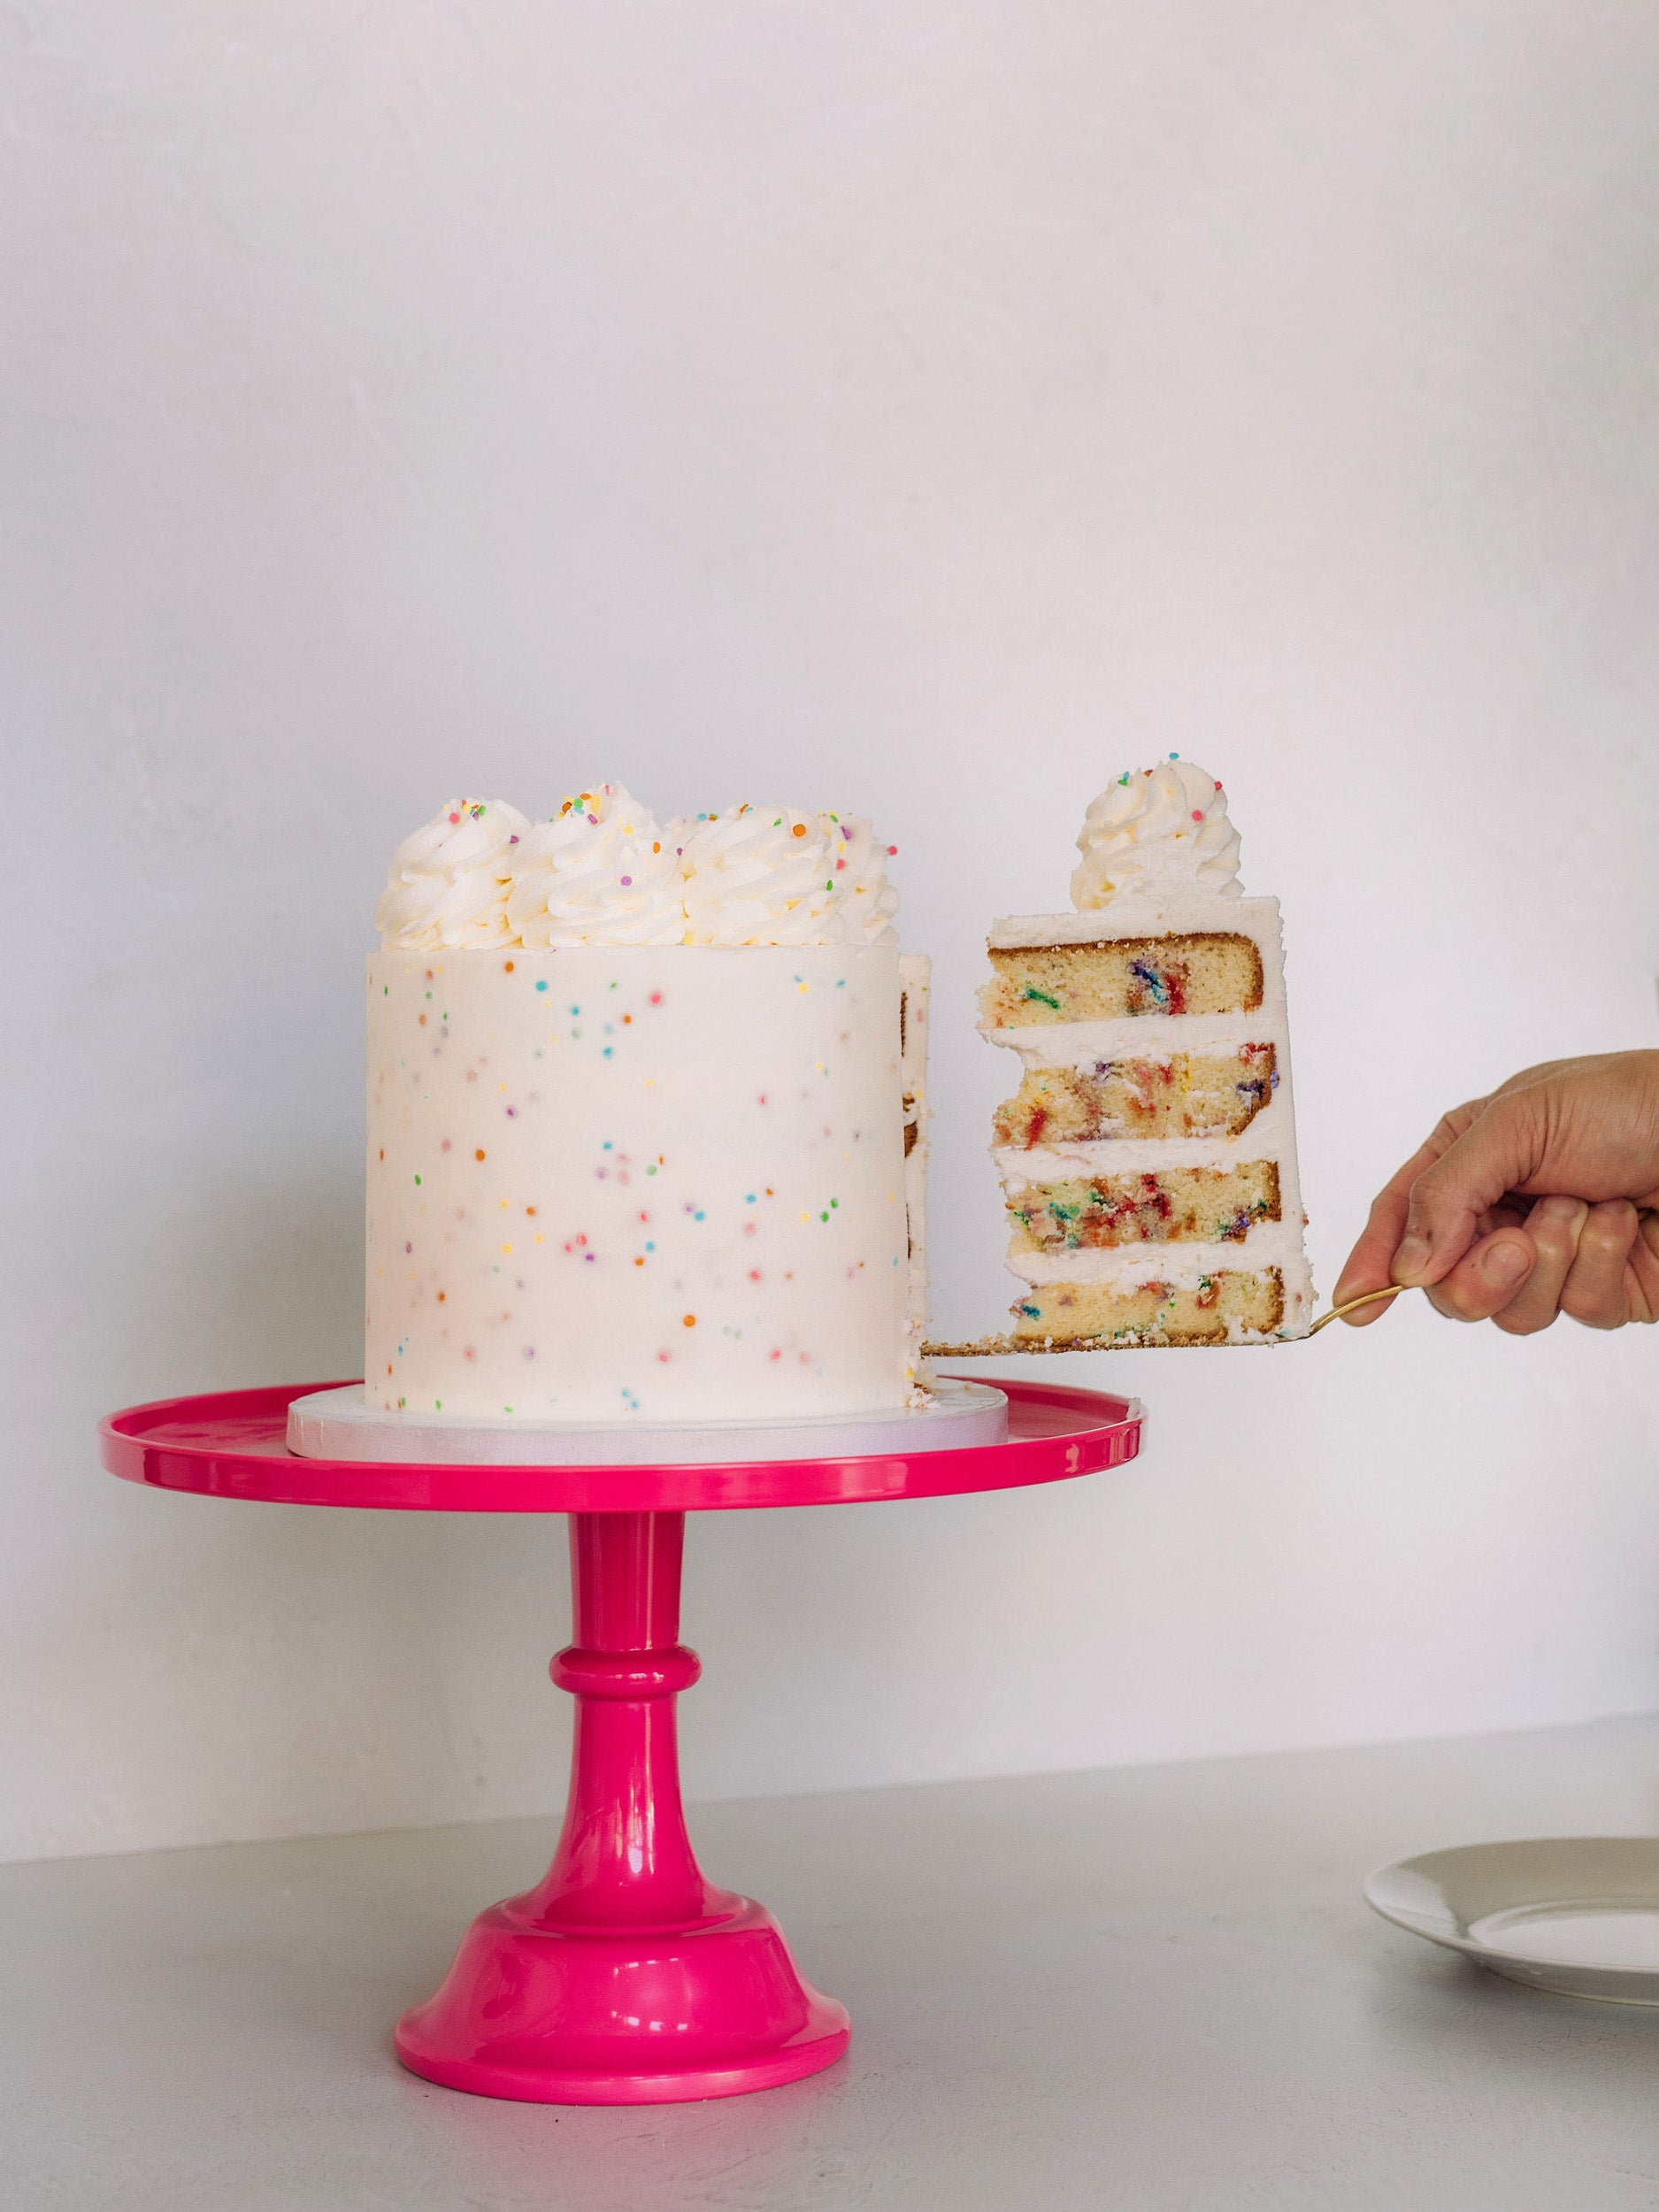 I Tried 4 Famous Funfetti Cake Recipes and the Winner Was Clear | The Kitchn